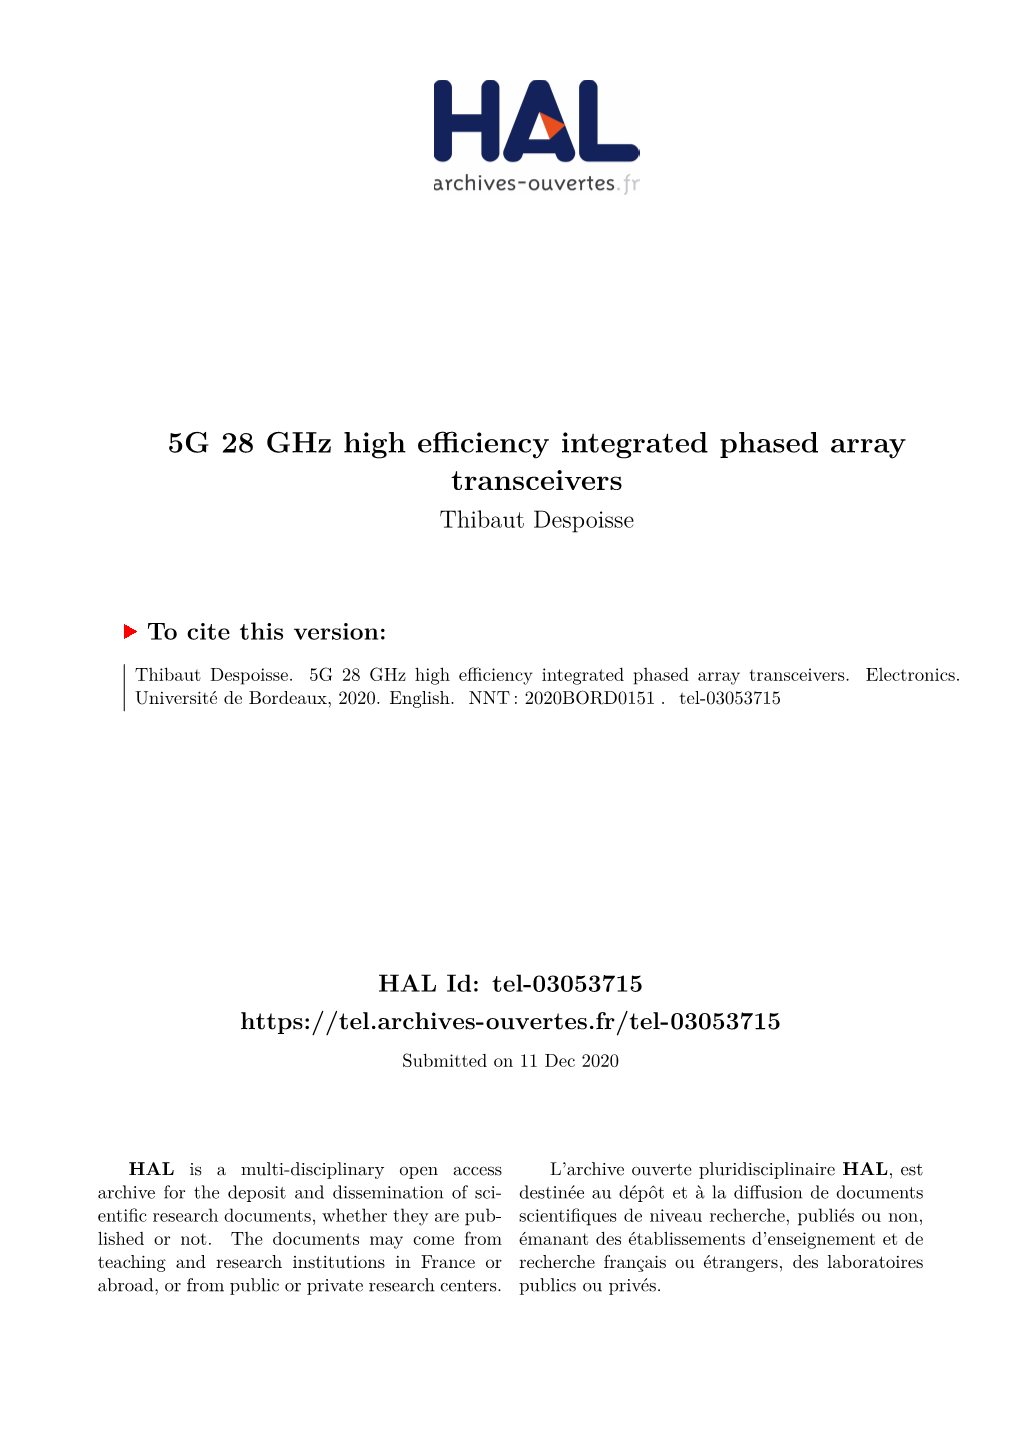 5G 28 Ghz High Efficiency Integrated Phased Array Transceivers